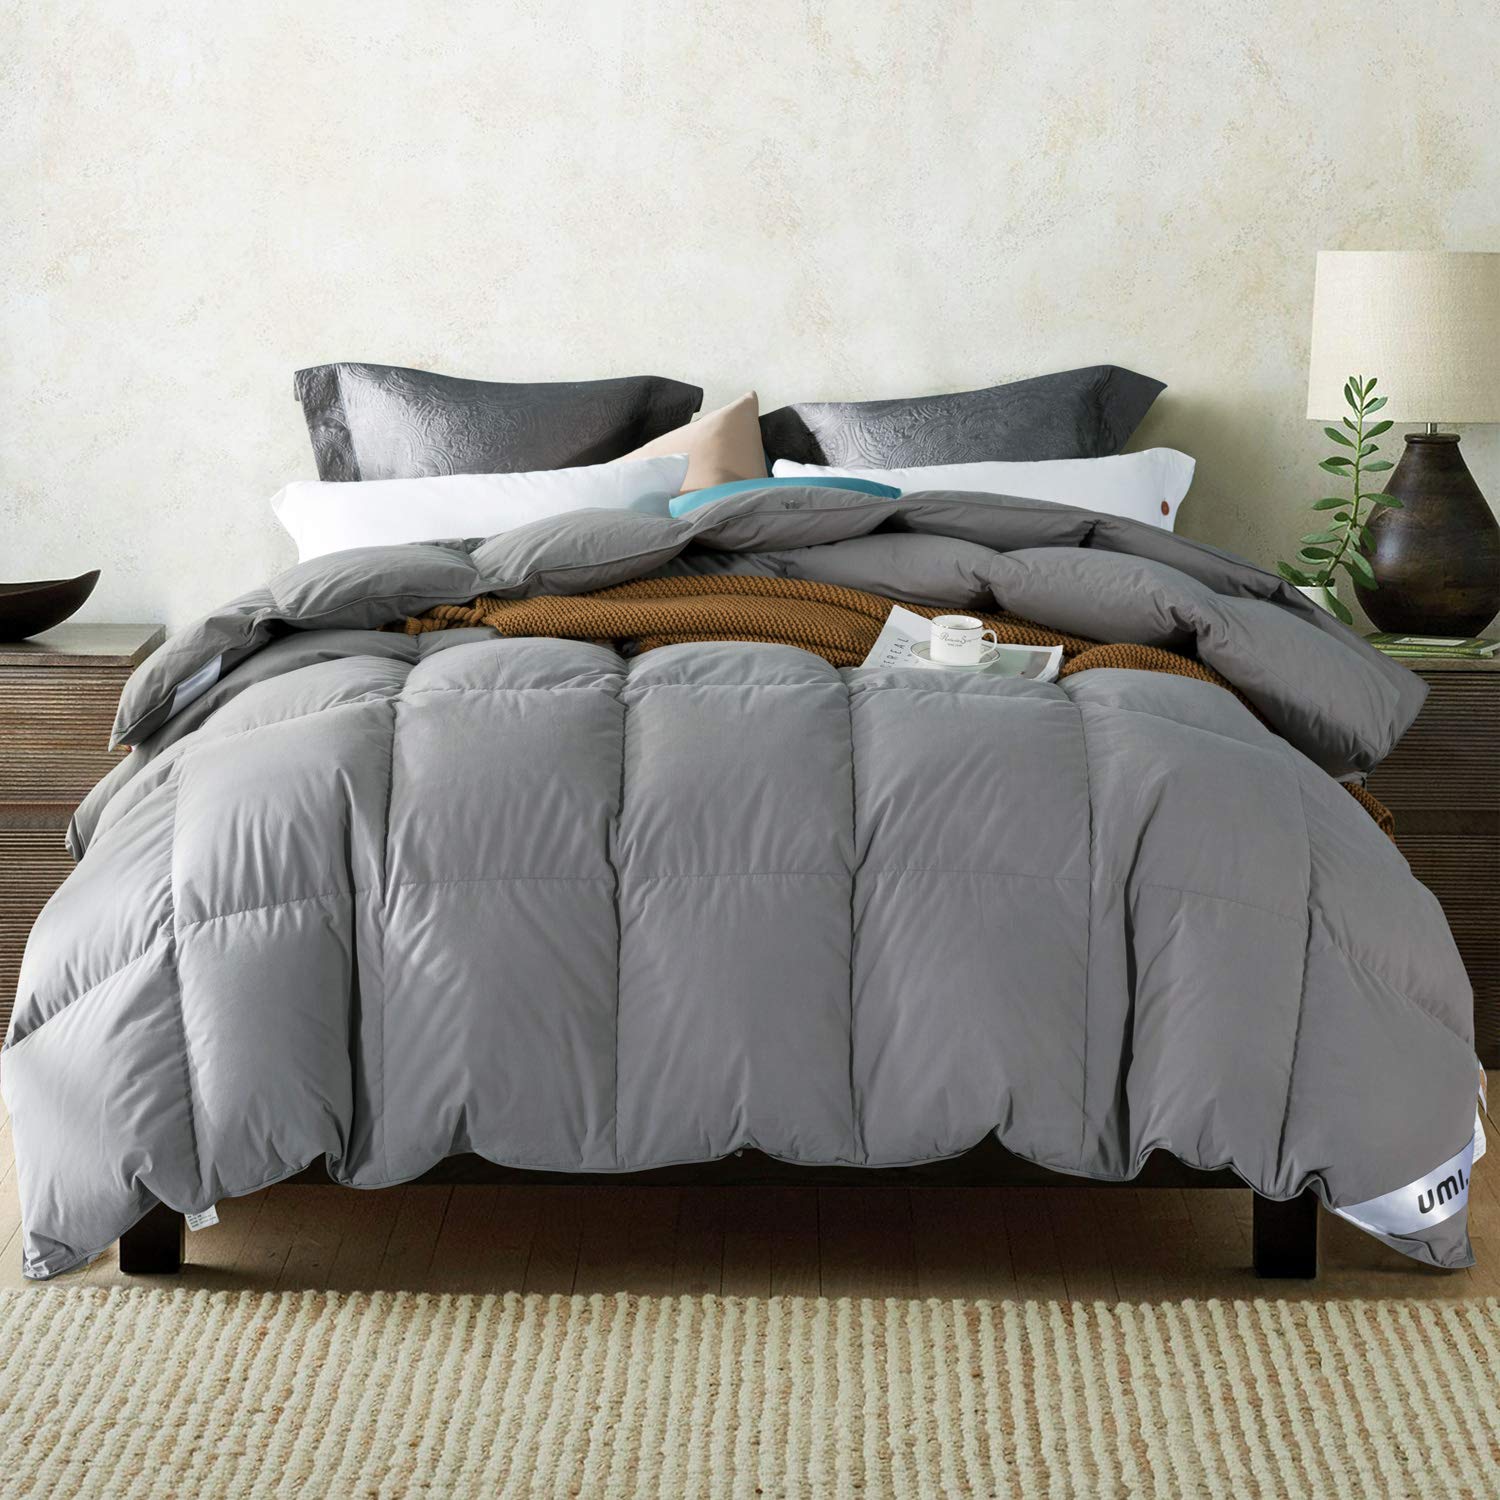 Amazon Brand - Umi White Goose Feather and Down Duvet with 100% Cotton Down Proof Fabric (10.5 Tog, Double,Grey)